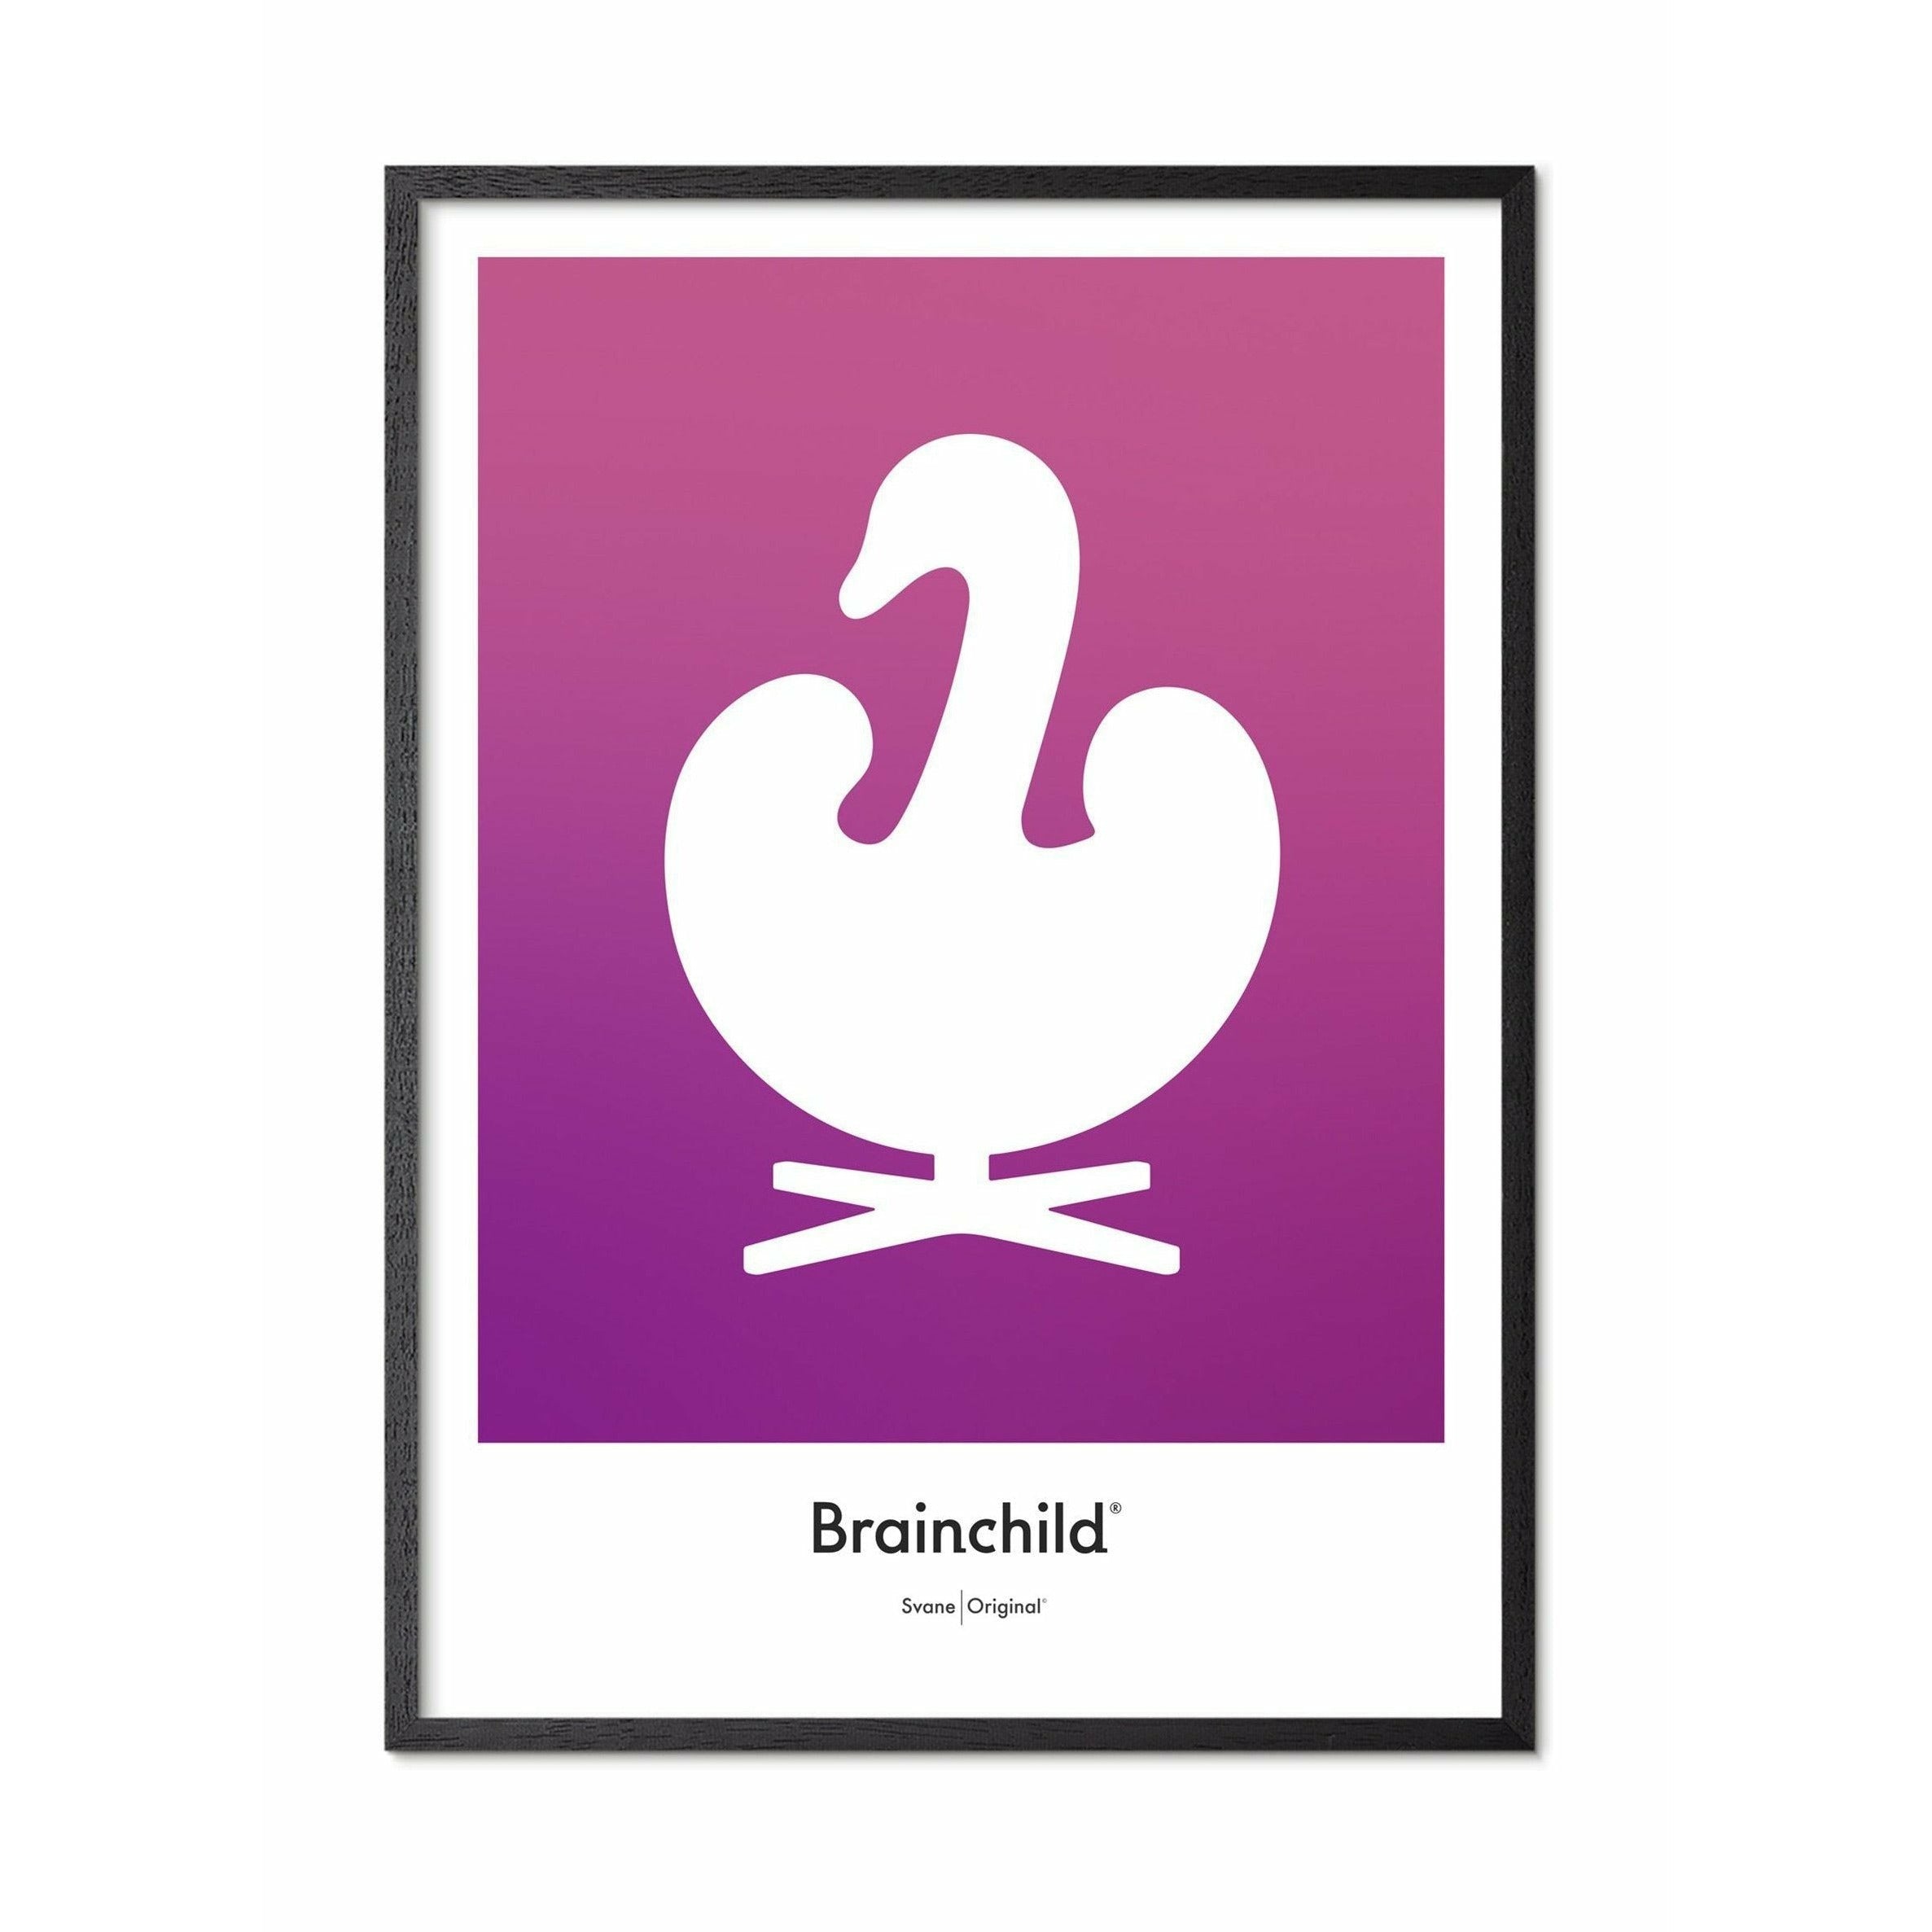 Brainchild Swan Design Icon Poster, Frame Made Of Black Lacquered Wood 30x40 Cm, Purple